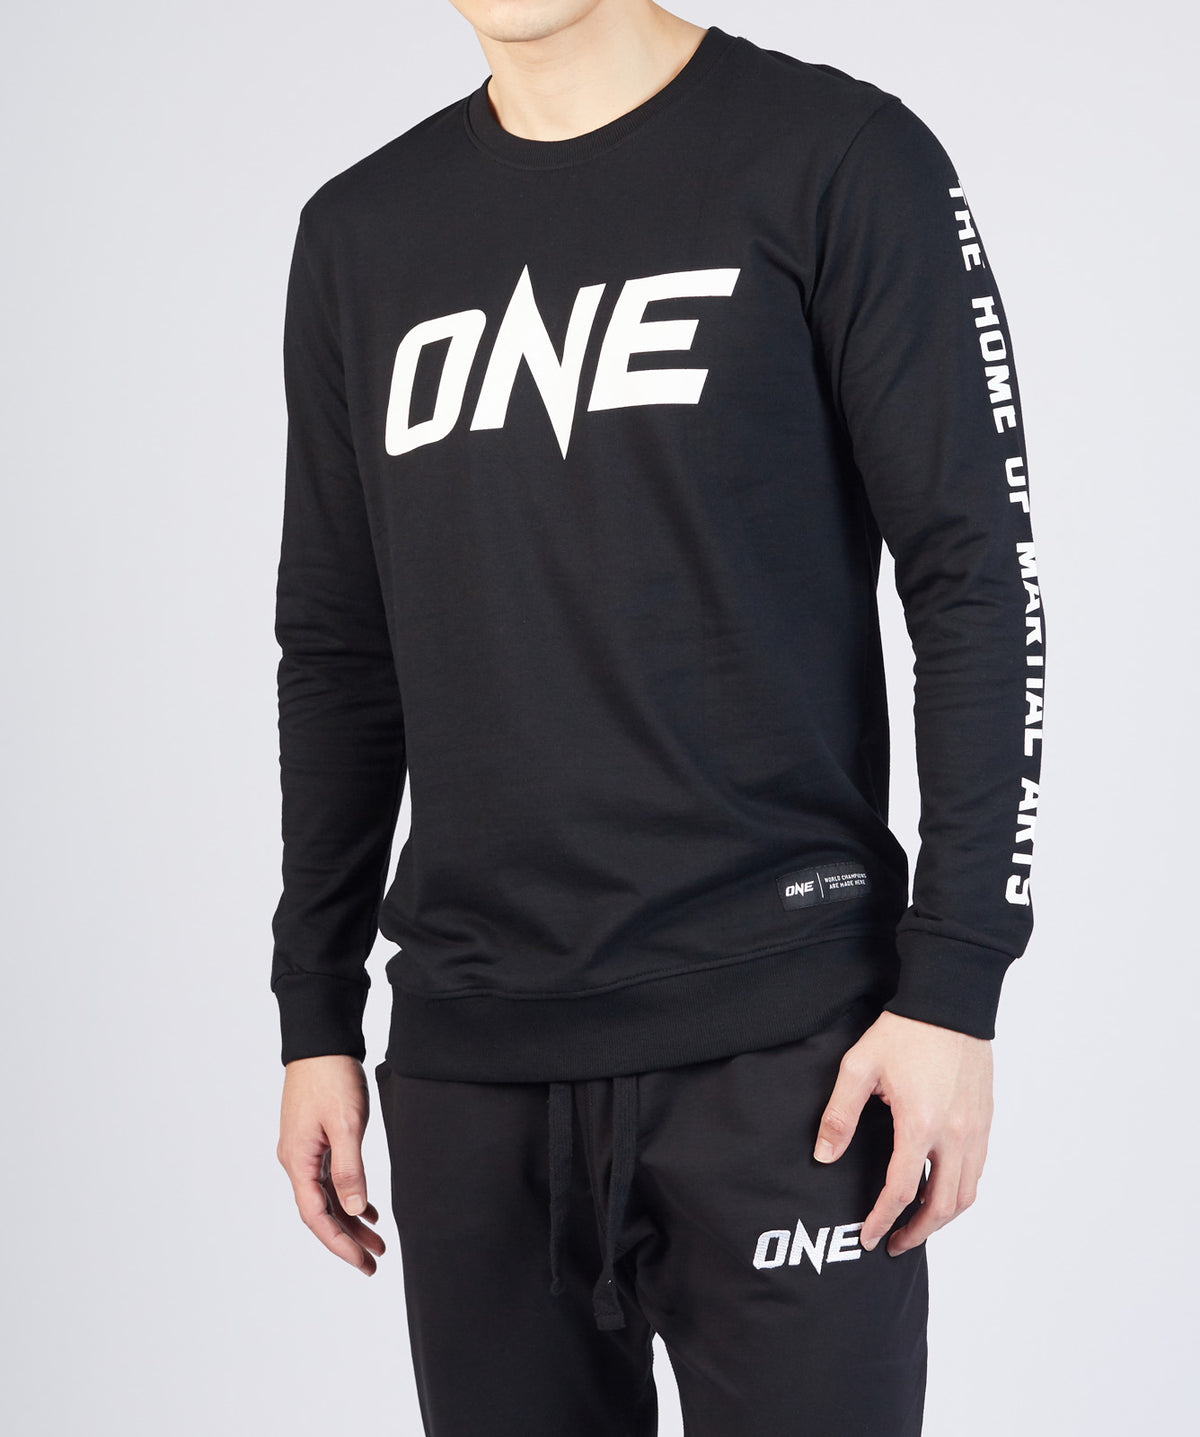 ONE Black Logo Sweatshirt - ONE.SHOP | The Official Online Shop of ONE Championship